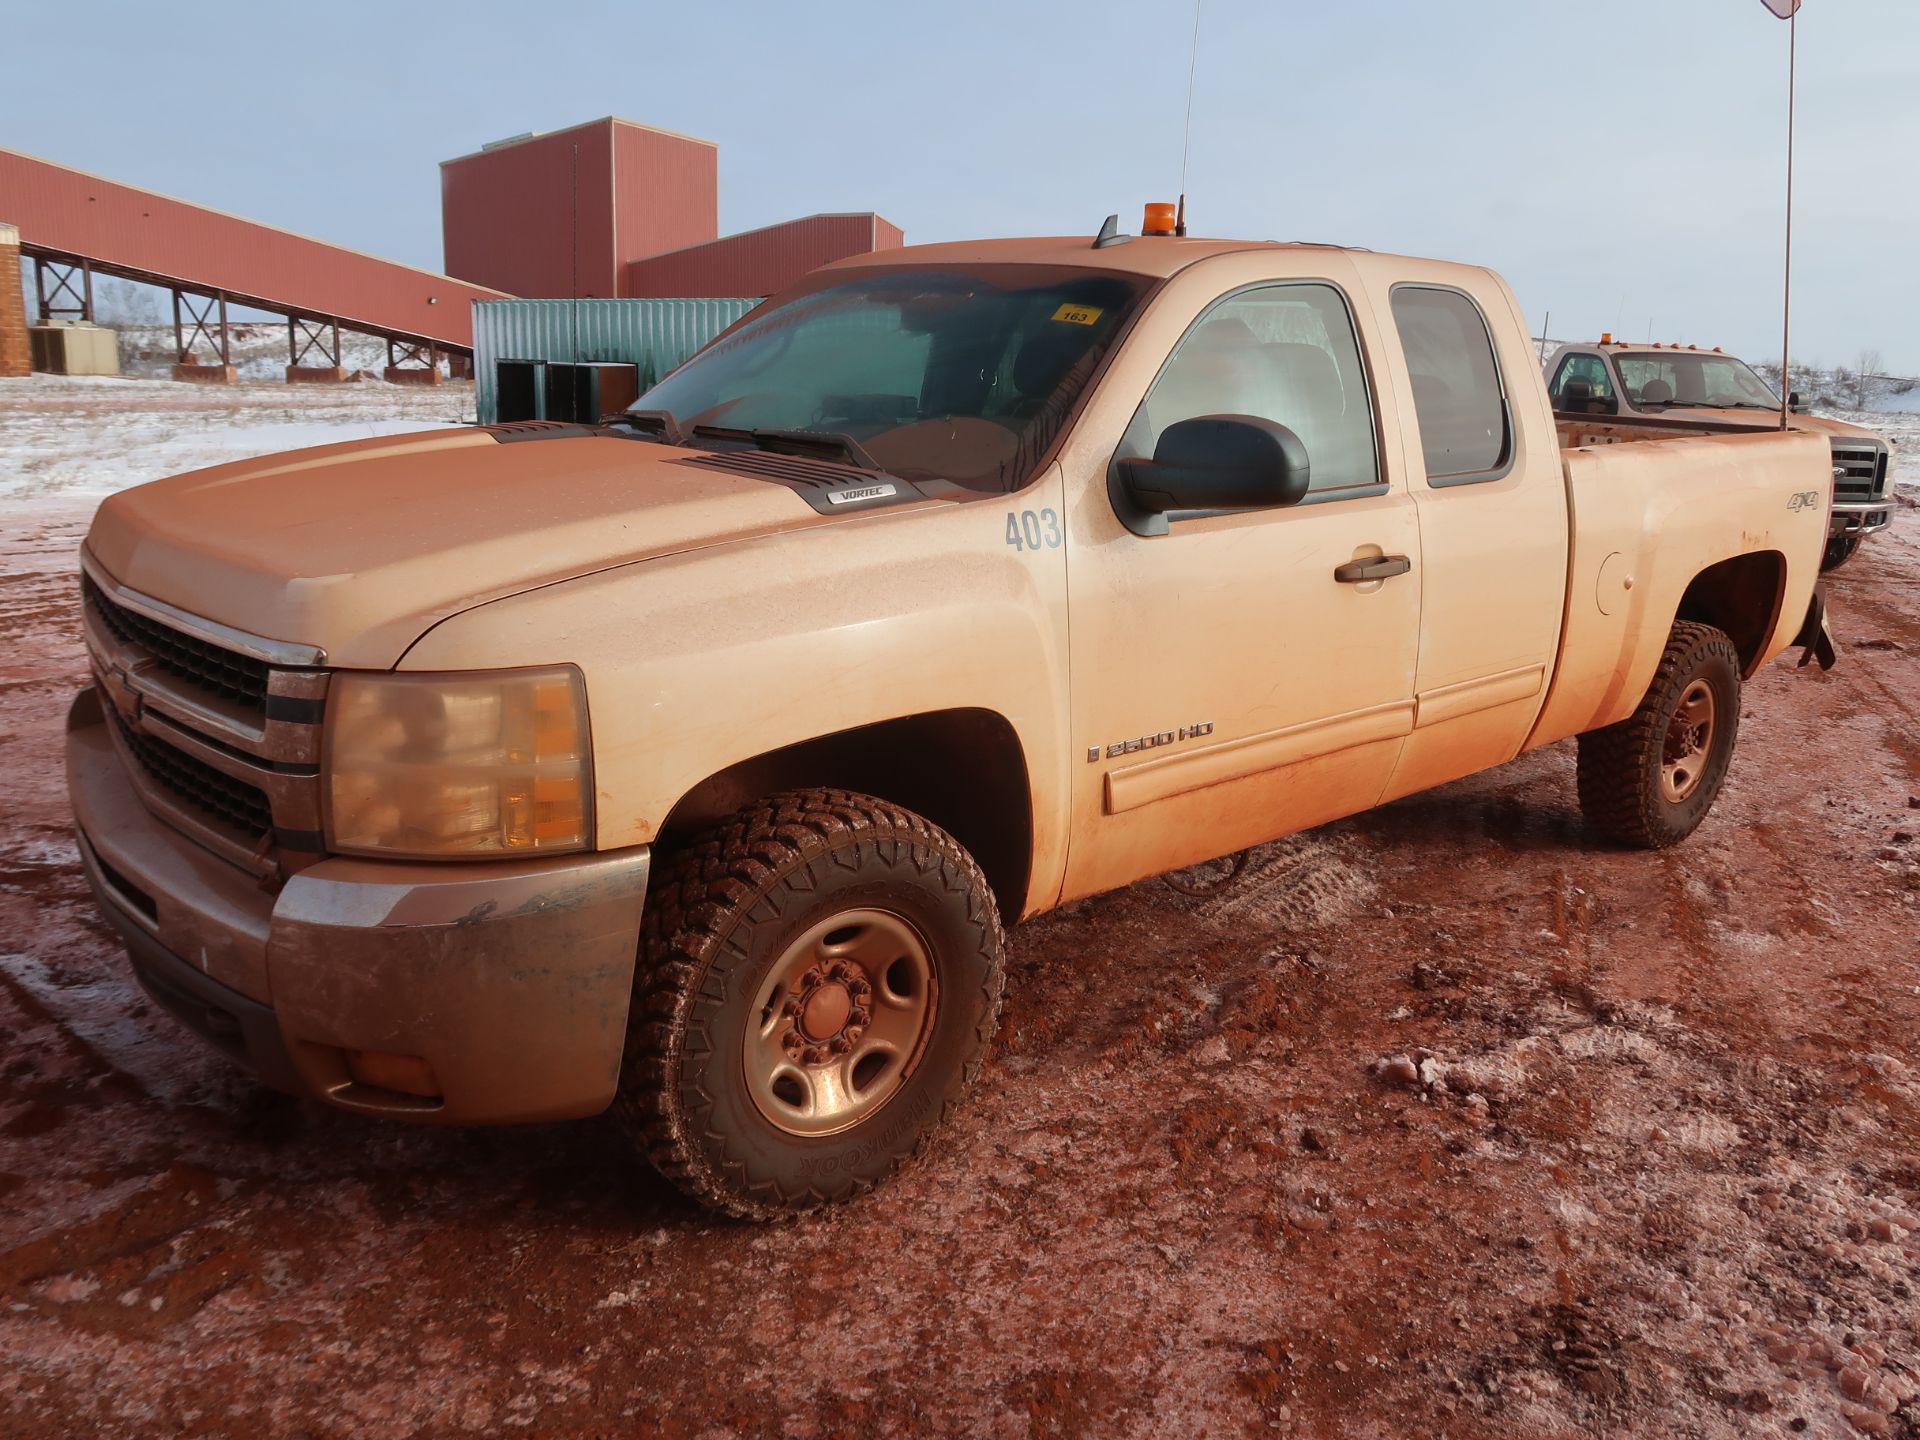 2009 Chevy 4x4 pickup truck, model 2500HD - Image 2 of 3